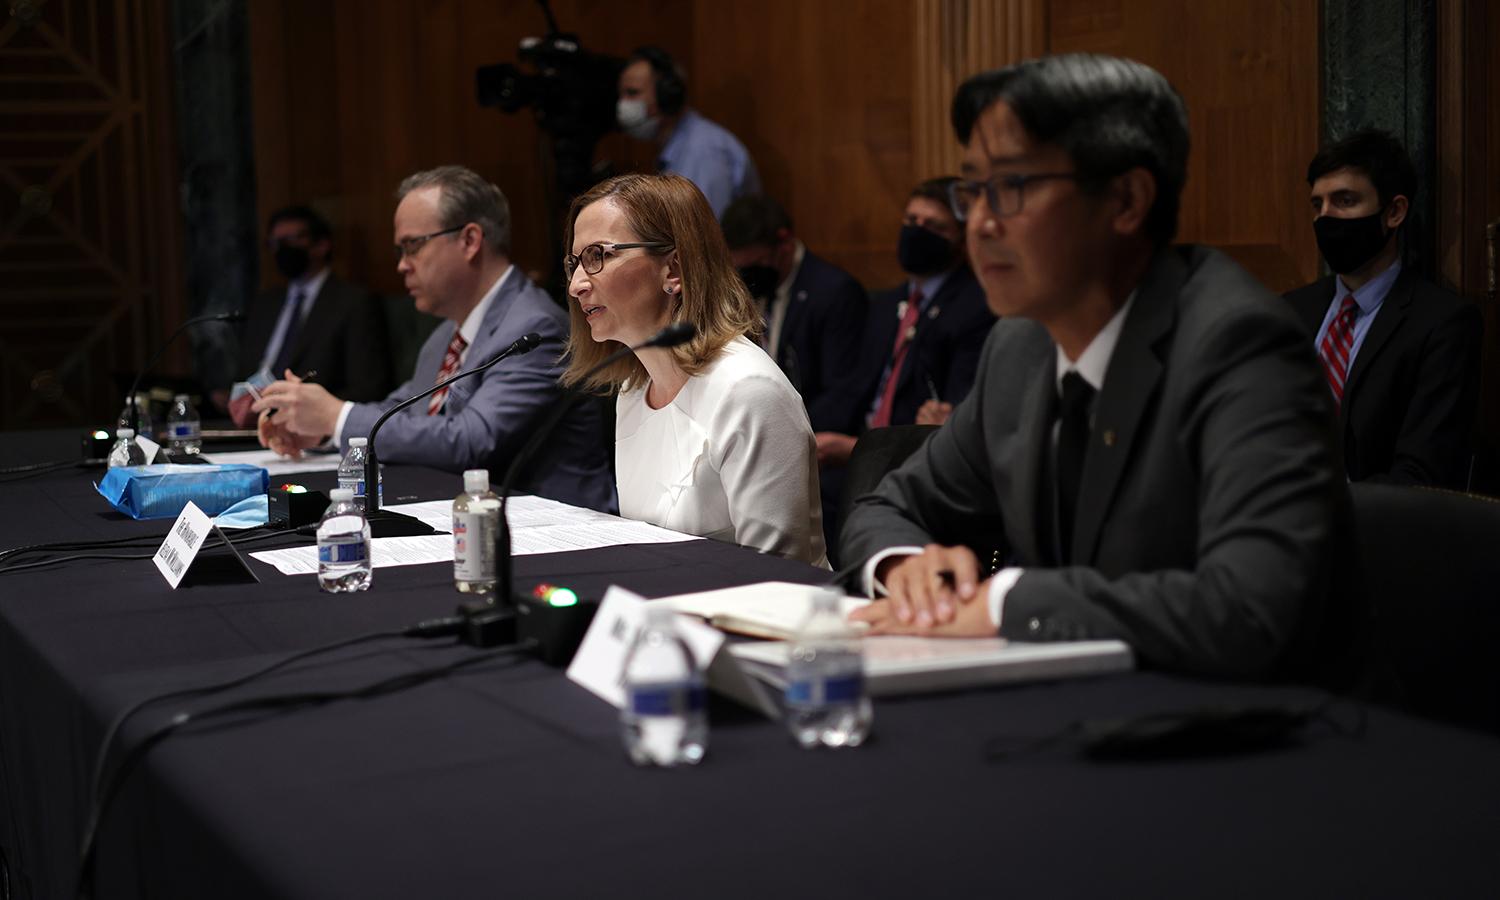 From left: Chairman of National Credit Union Administration (NCUA) Todd Harper, Chairman of Federal Deposit Insurance Corporation (FDIC) Jelena McWilliams and Acting Comptroller of the Currency Michael Hsu testify during a hearing before the Senate Banking, Housing and Urban Affairs Committee on Aug. 3, 2021, in Washington. (Photo by Alex Wong/Gett...